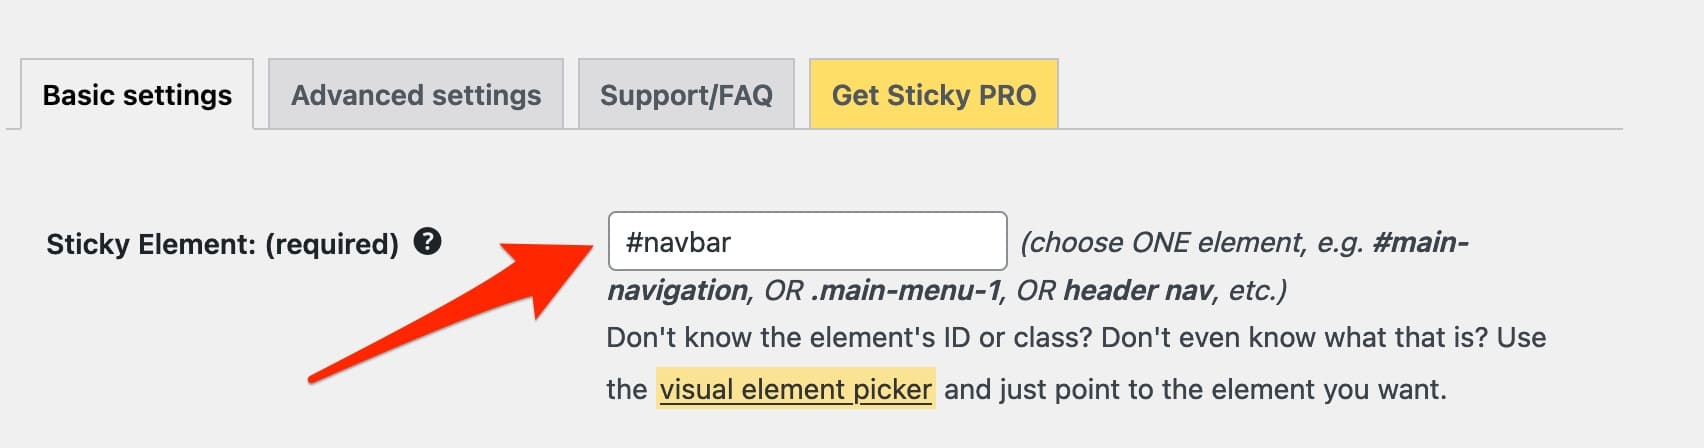 Add an element ID to create a sticky element in Sticky Menu & Sticky Header.